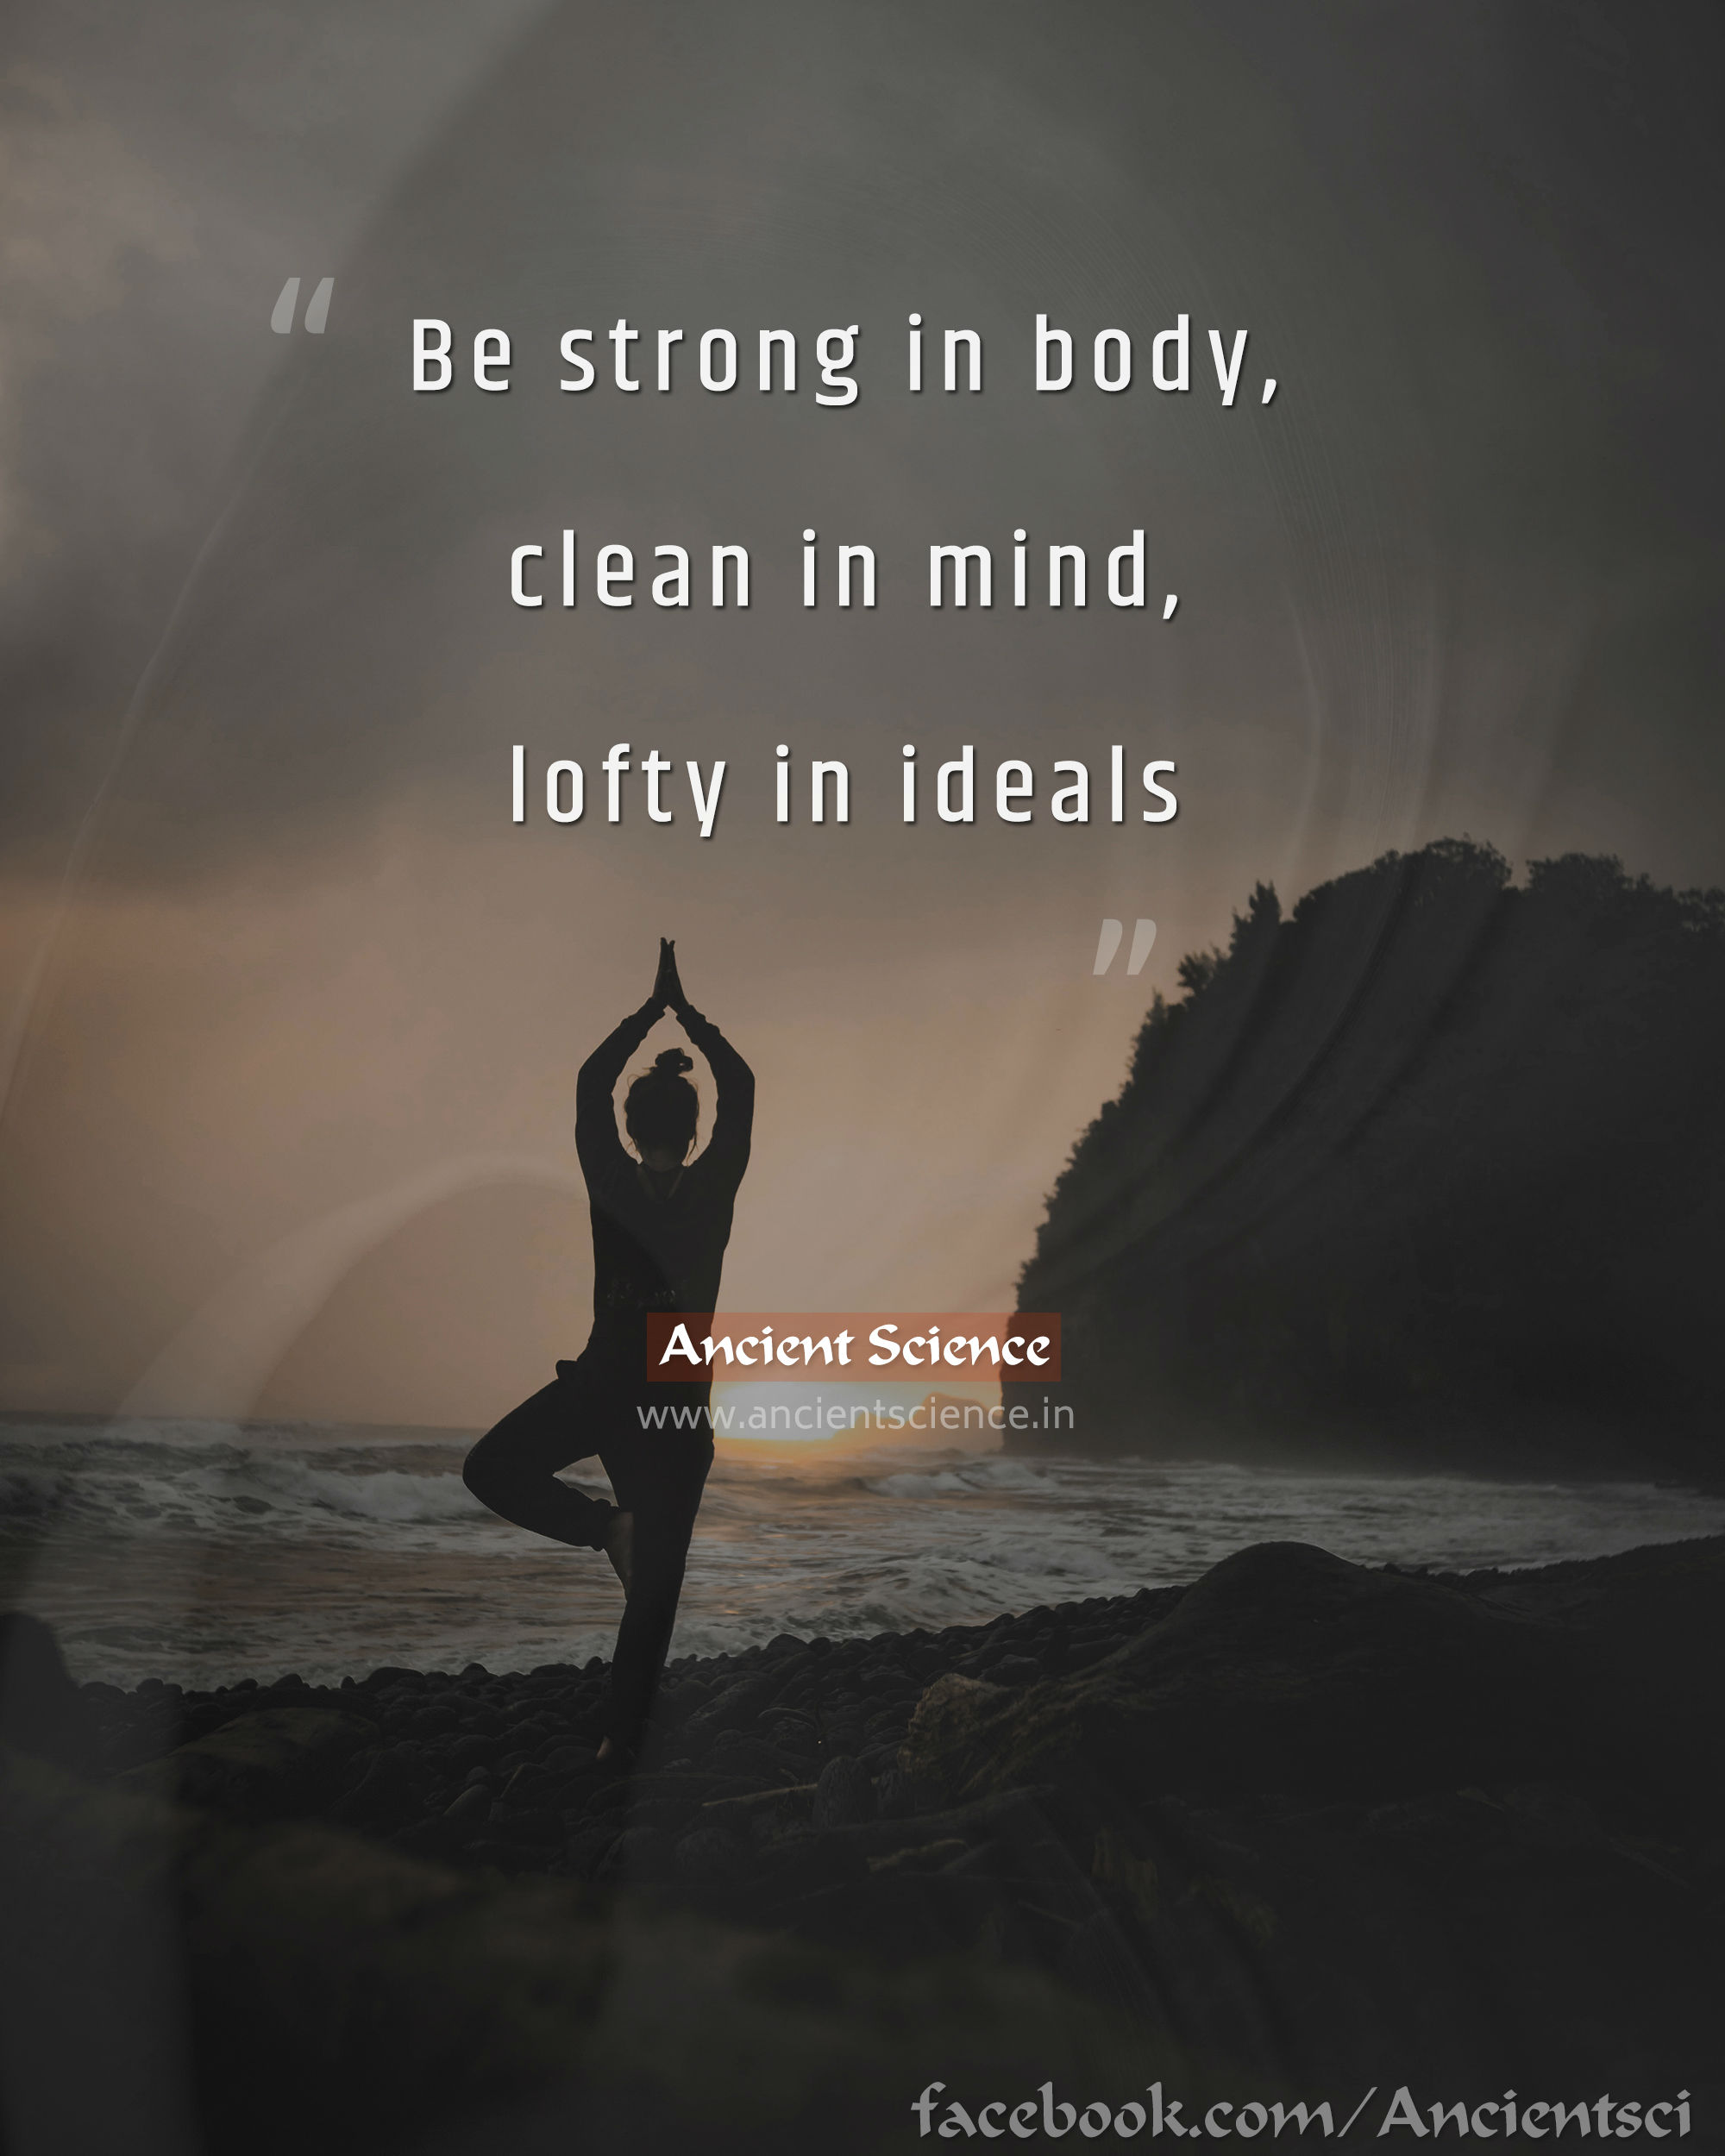 Be strong in body, clean in mind, lofty in ideals